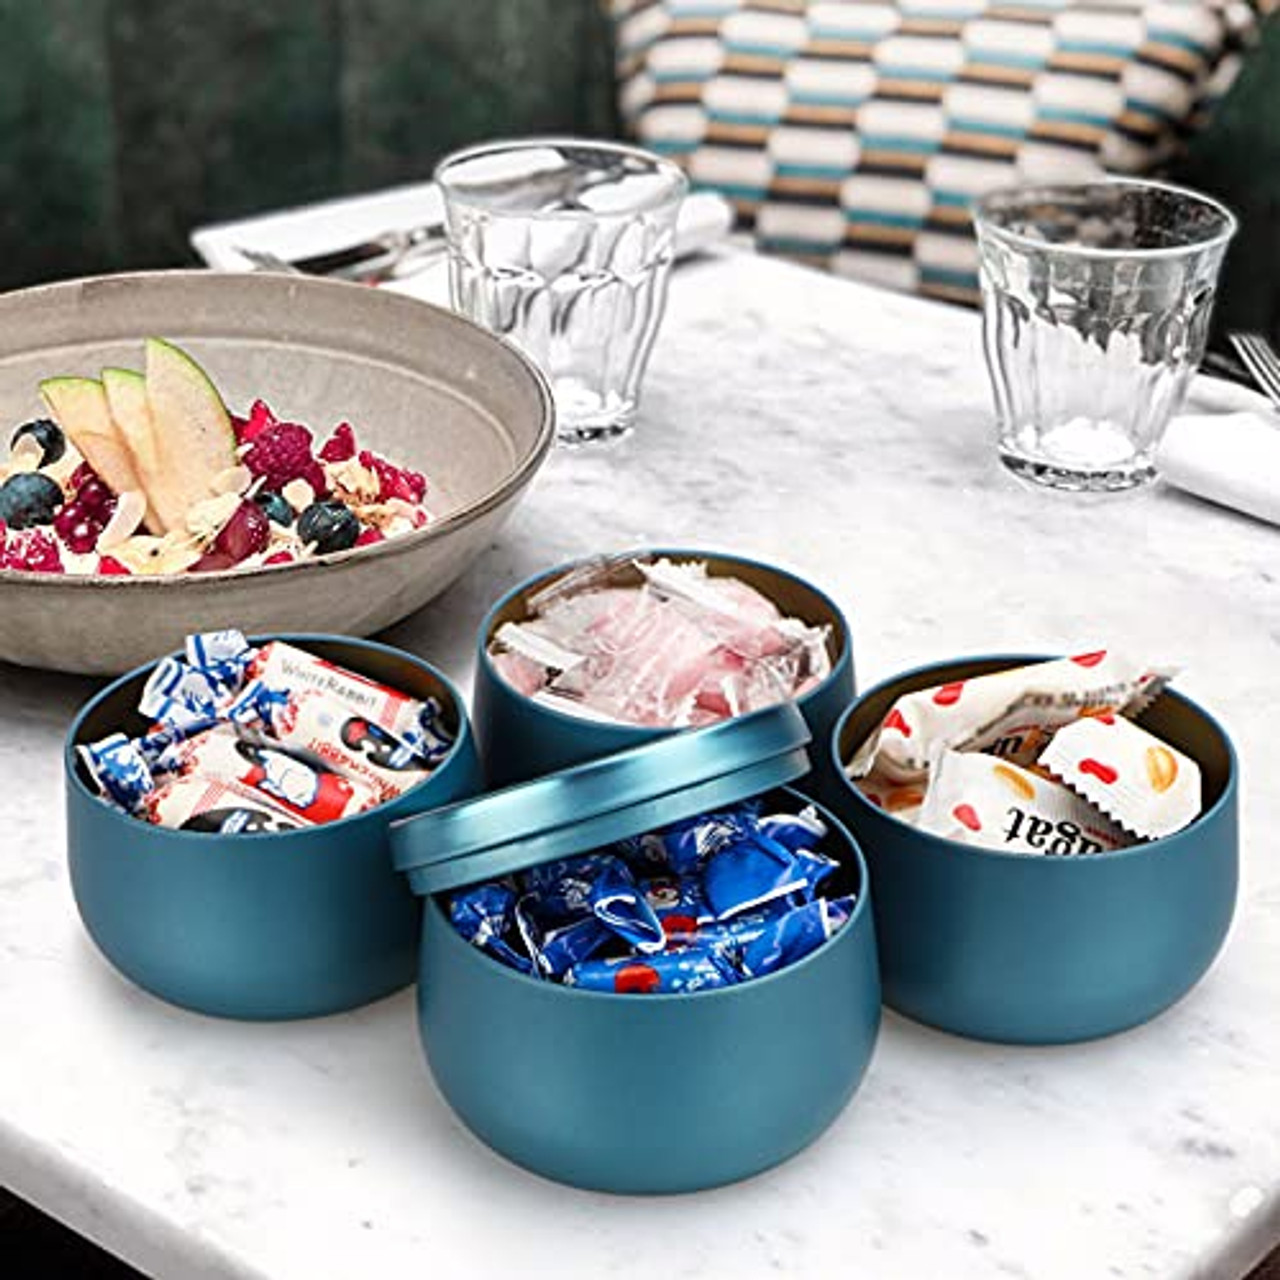 Candle Tins 24 Pcs, 8 oz Metal Candle Jars with Lids Portable Round Travel  Tin Empty